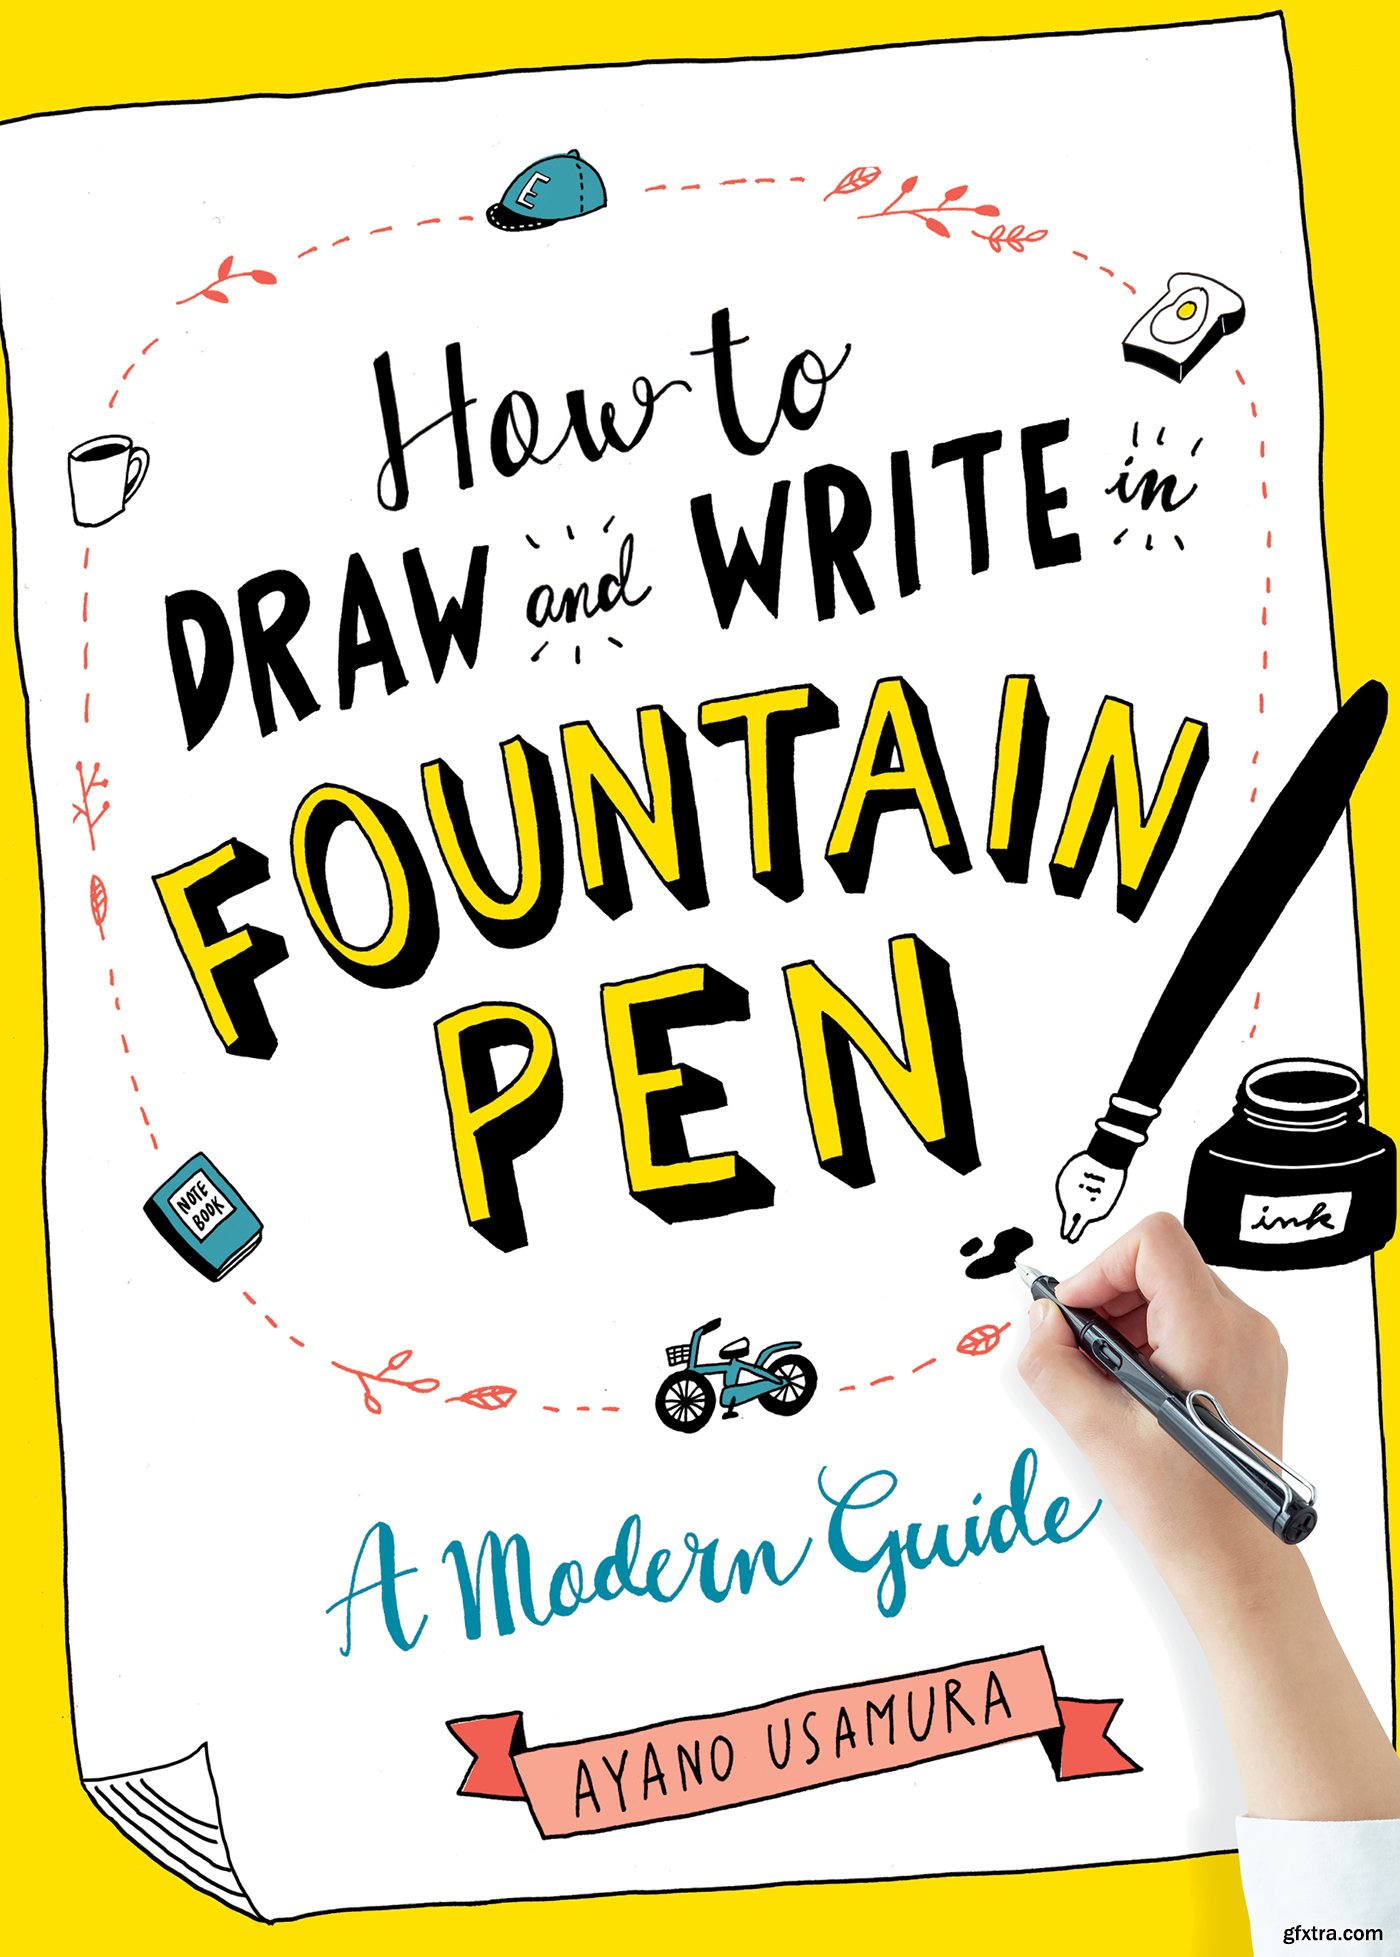 How to Draw and Write in Fountain Pen: A Modern Guide by Ayano Usamura ...